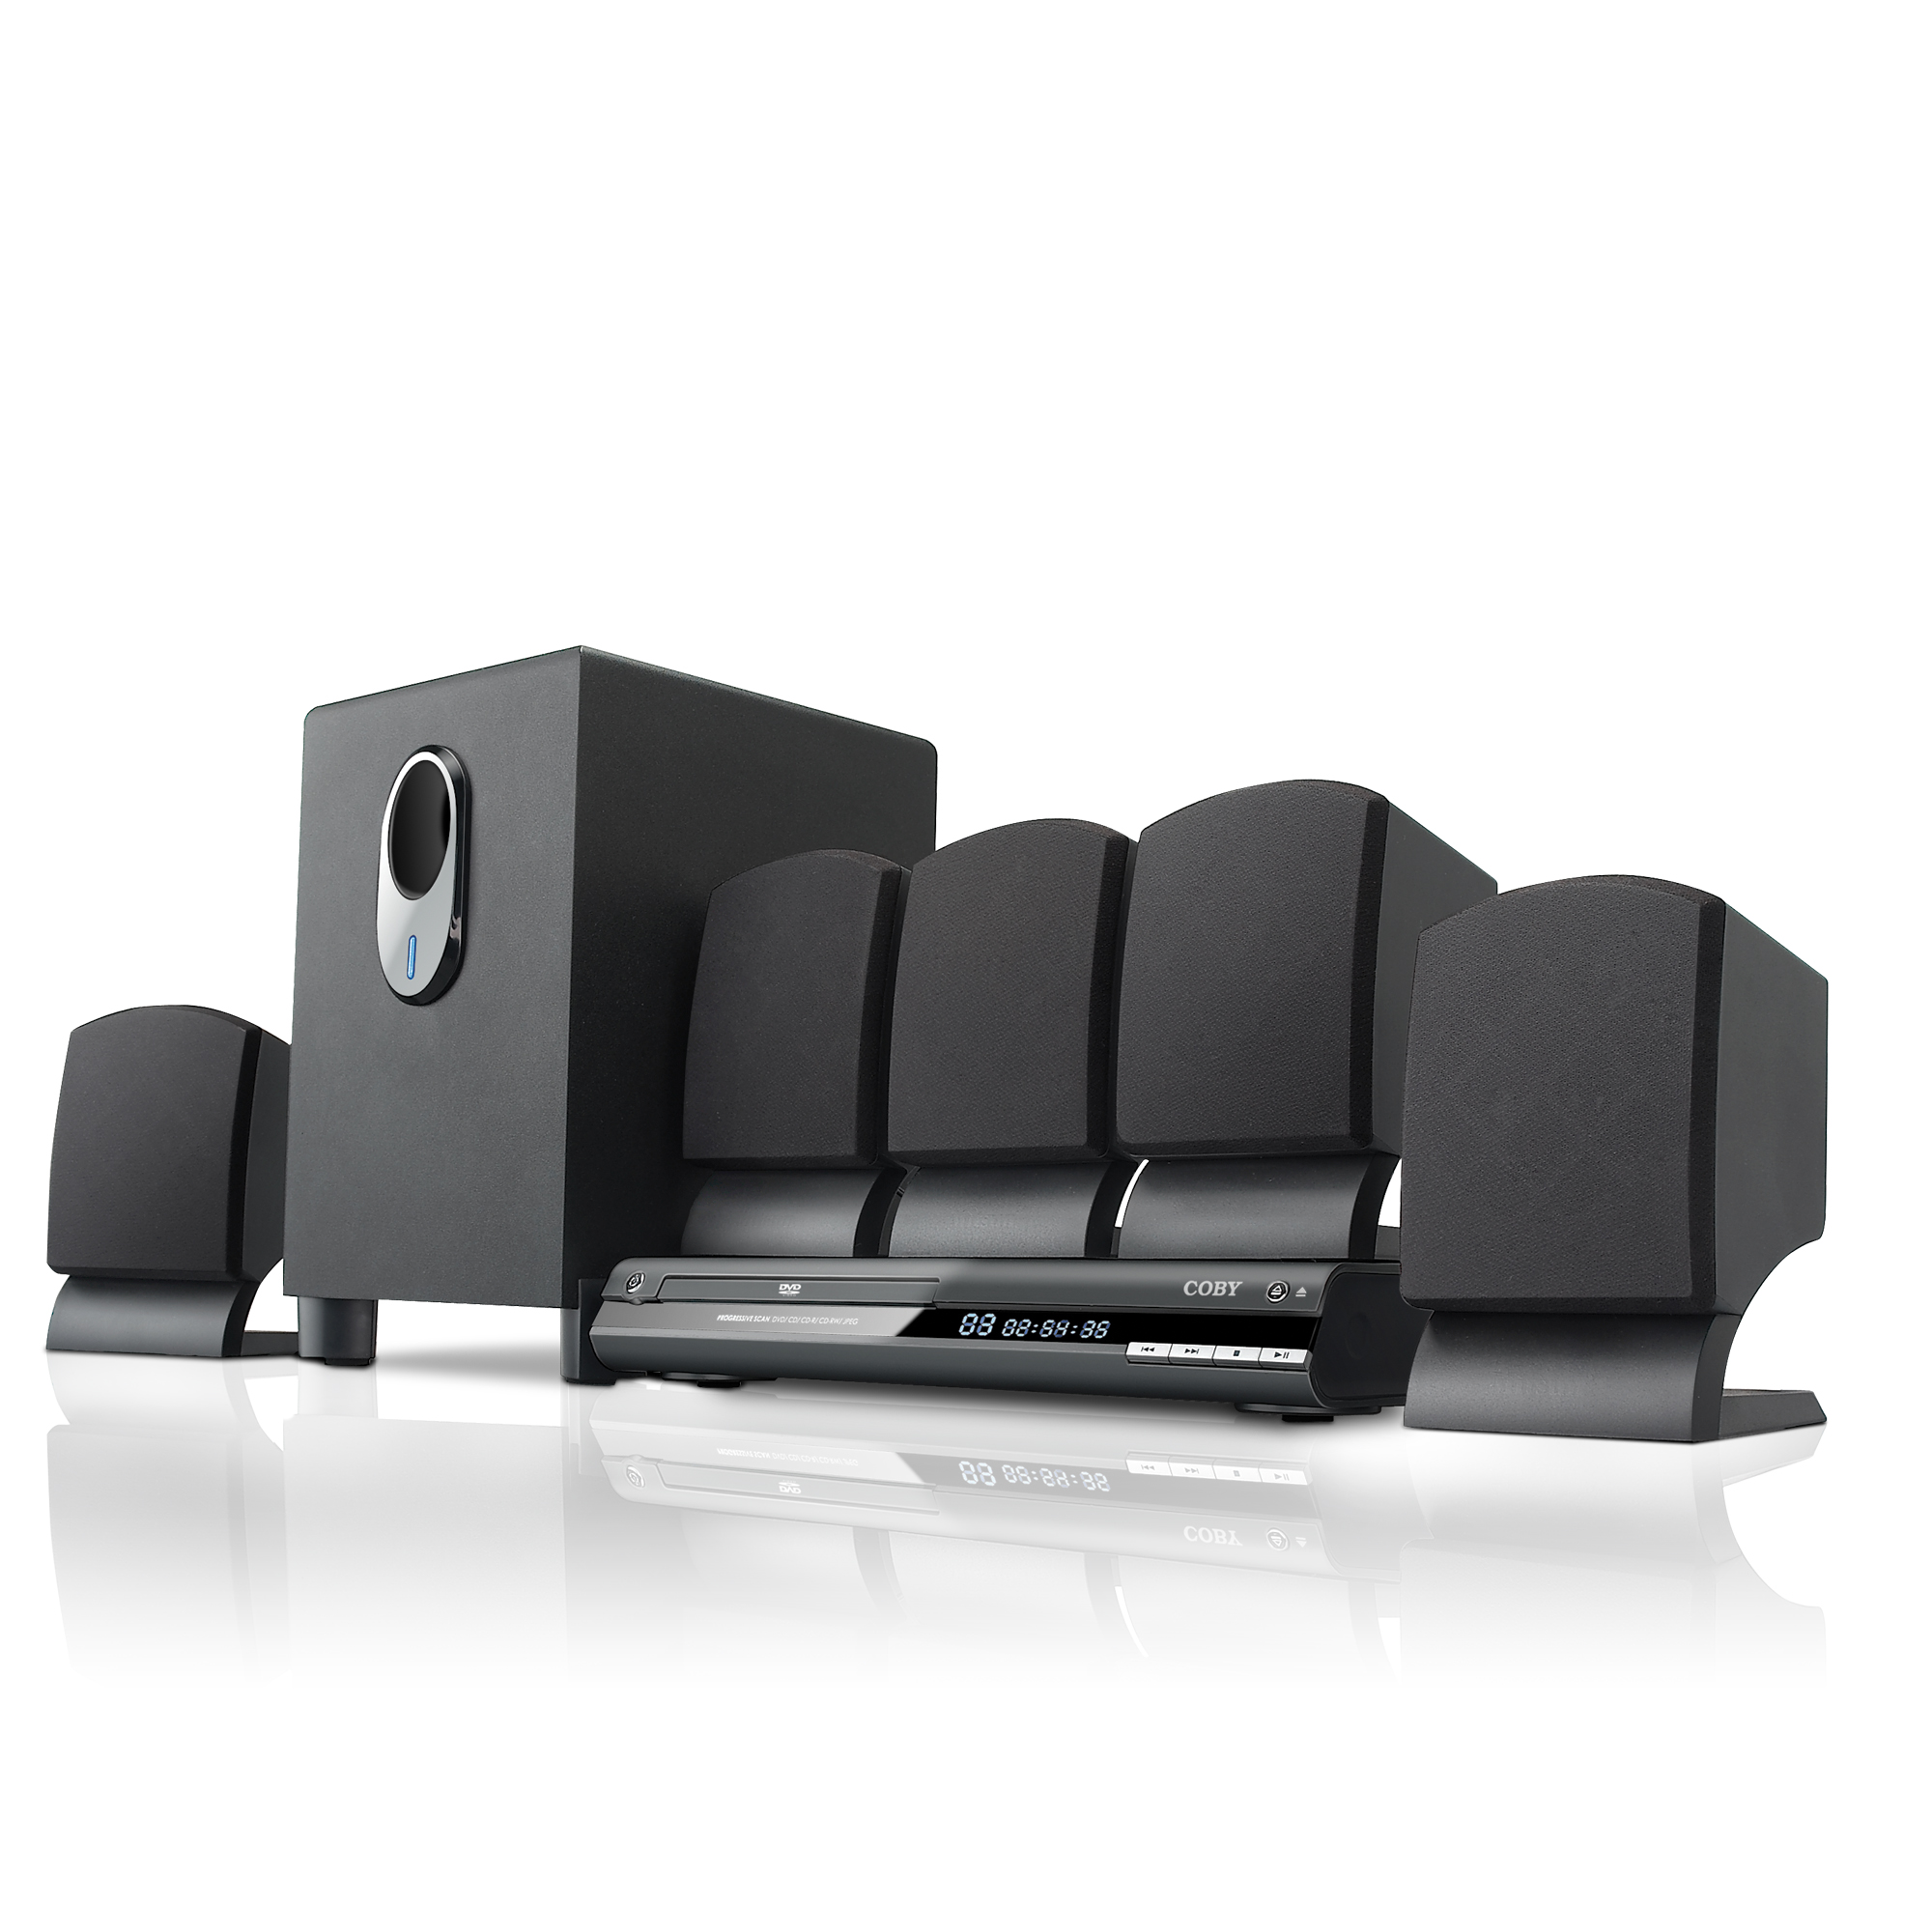 Coby DVD765 5.1-Channel DVD Home Theater System